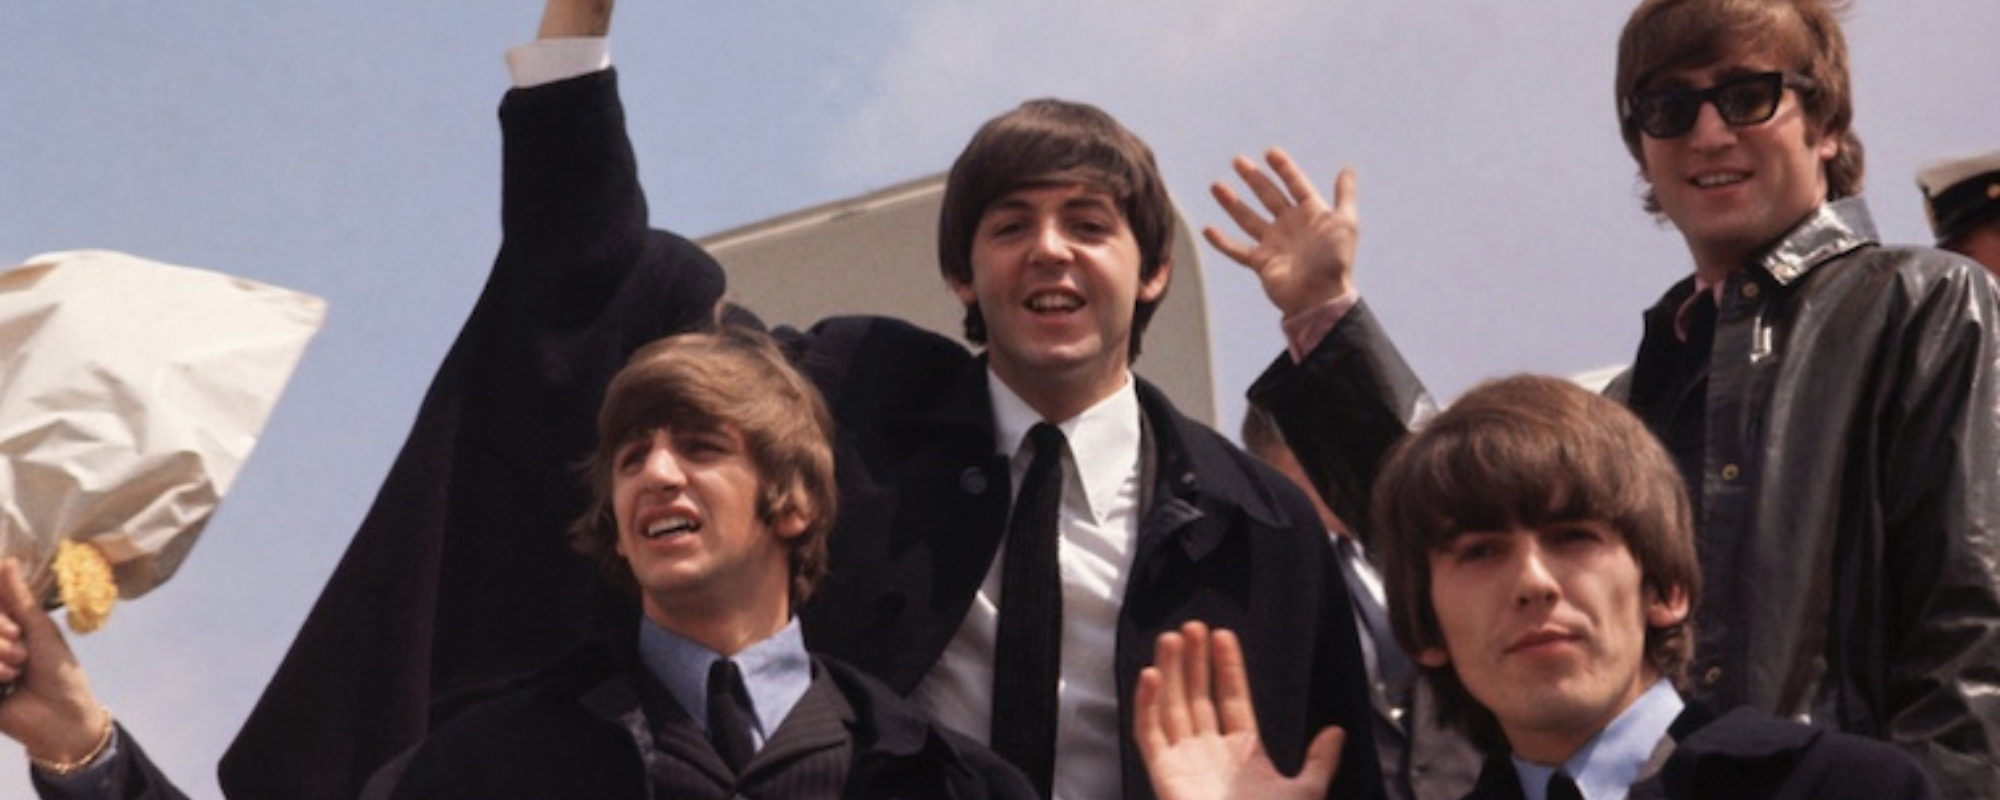 New BBC Podcast to Feature Rare 1964 Beatles Interview and Release of New Track, “Now and Then”